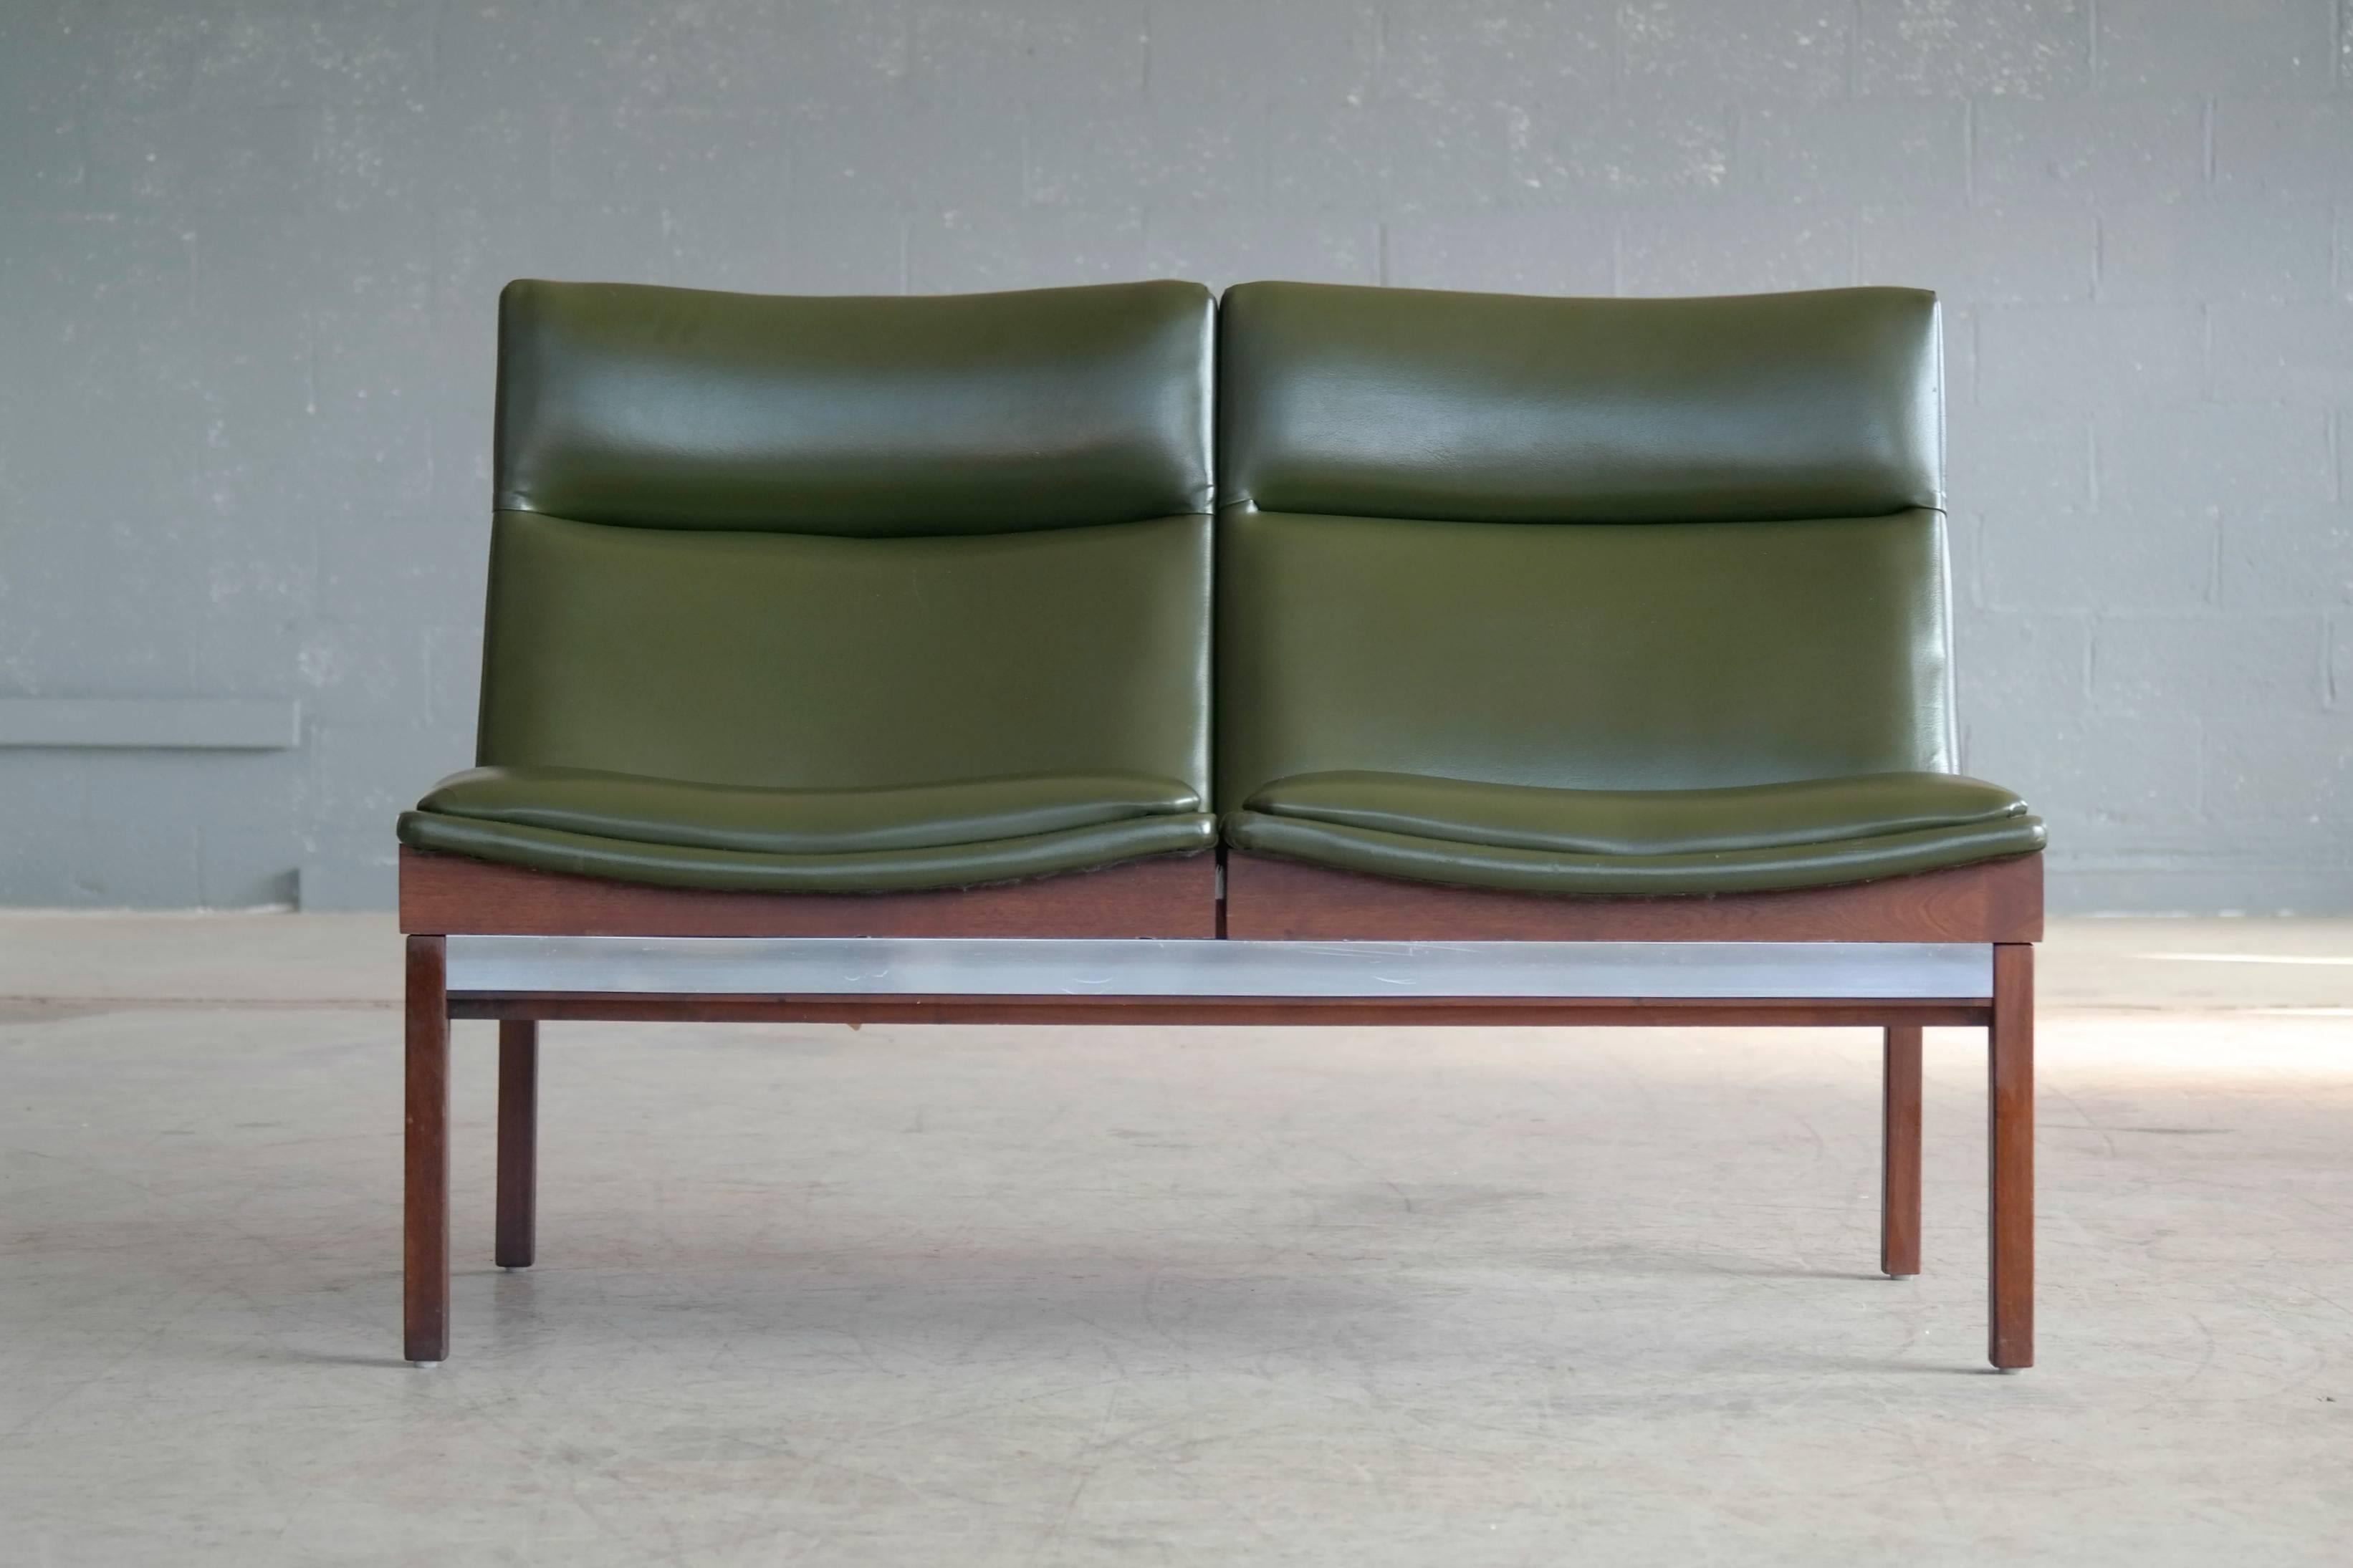 Very cool modular two-seat sofa made in walnut with aluminium accents and covered in green Naugahyde designed by Arthur Umanoff in the 1950s for Madison Furniture Industries. Overall very good condition with a few small blemishes to the Naugahyde